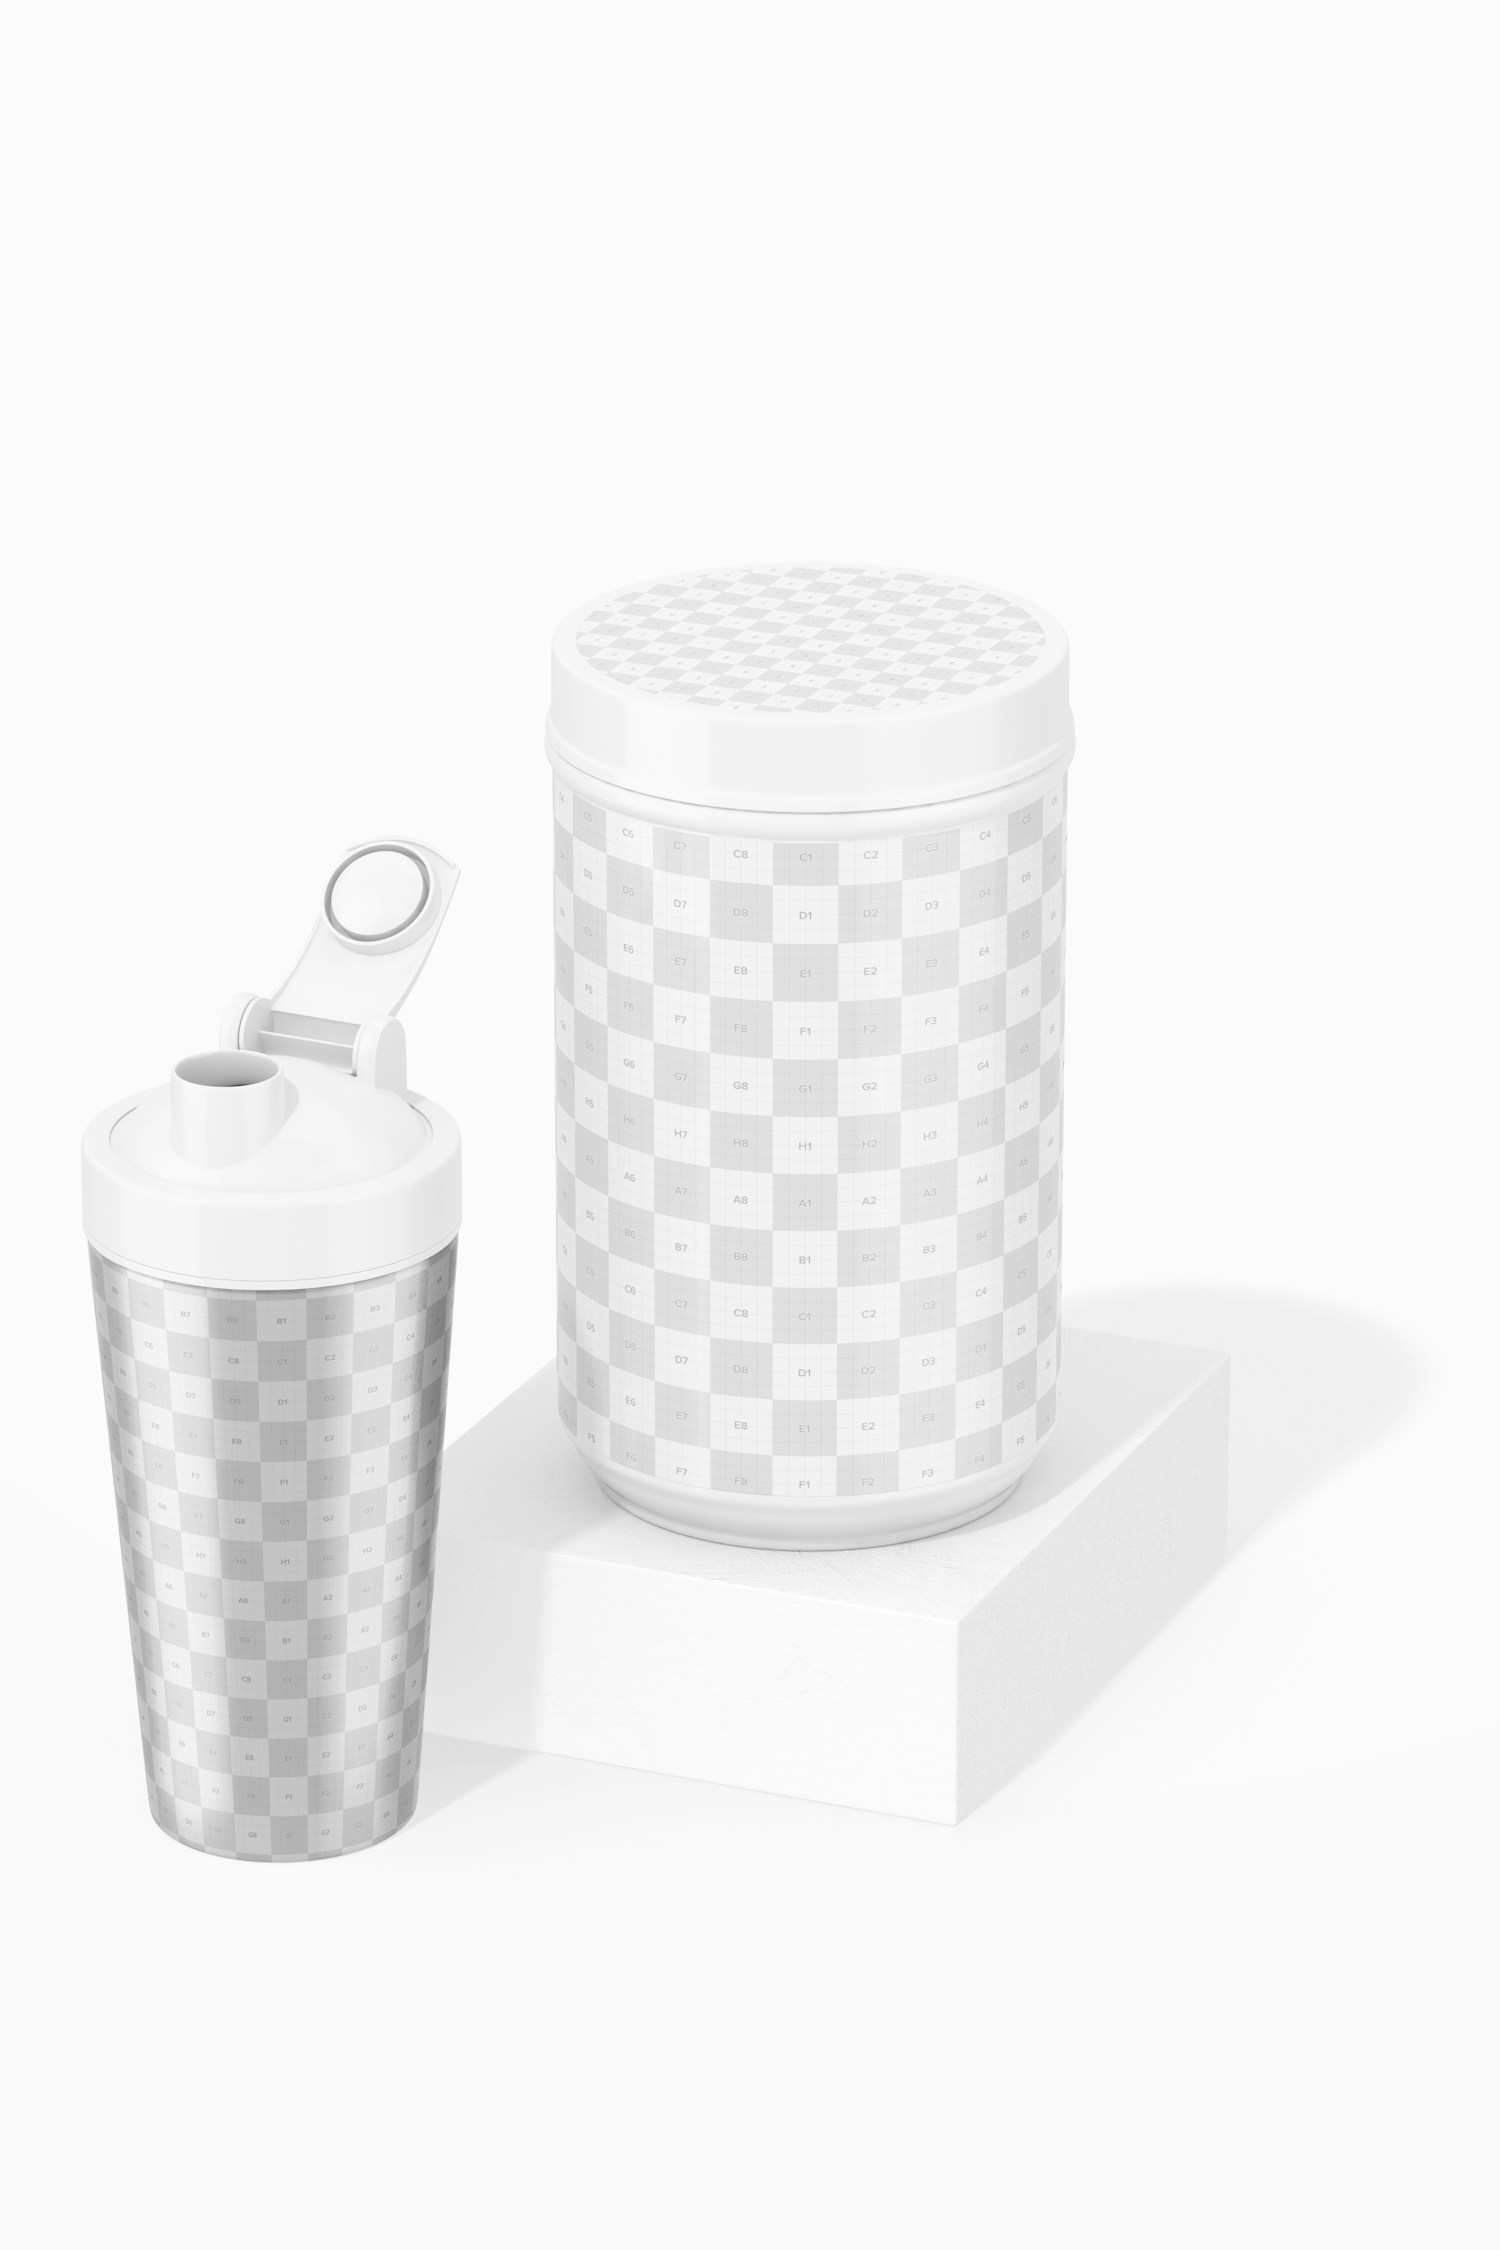 Long Protein Powder Container Mockup, with Bottle